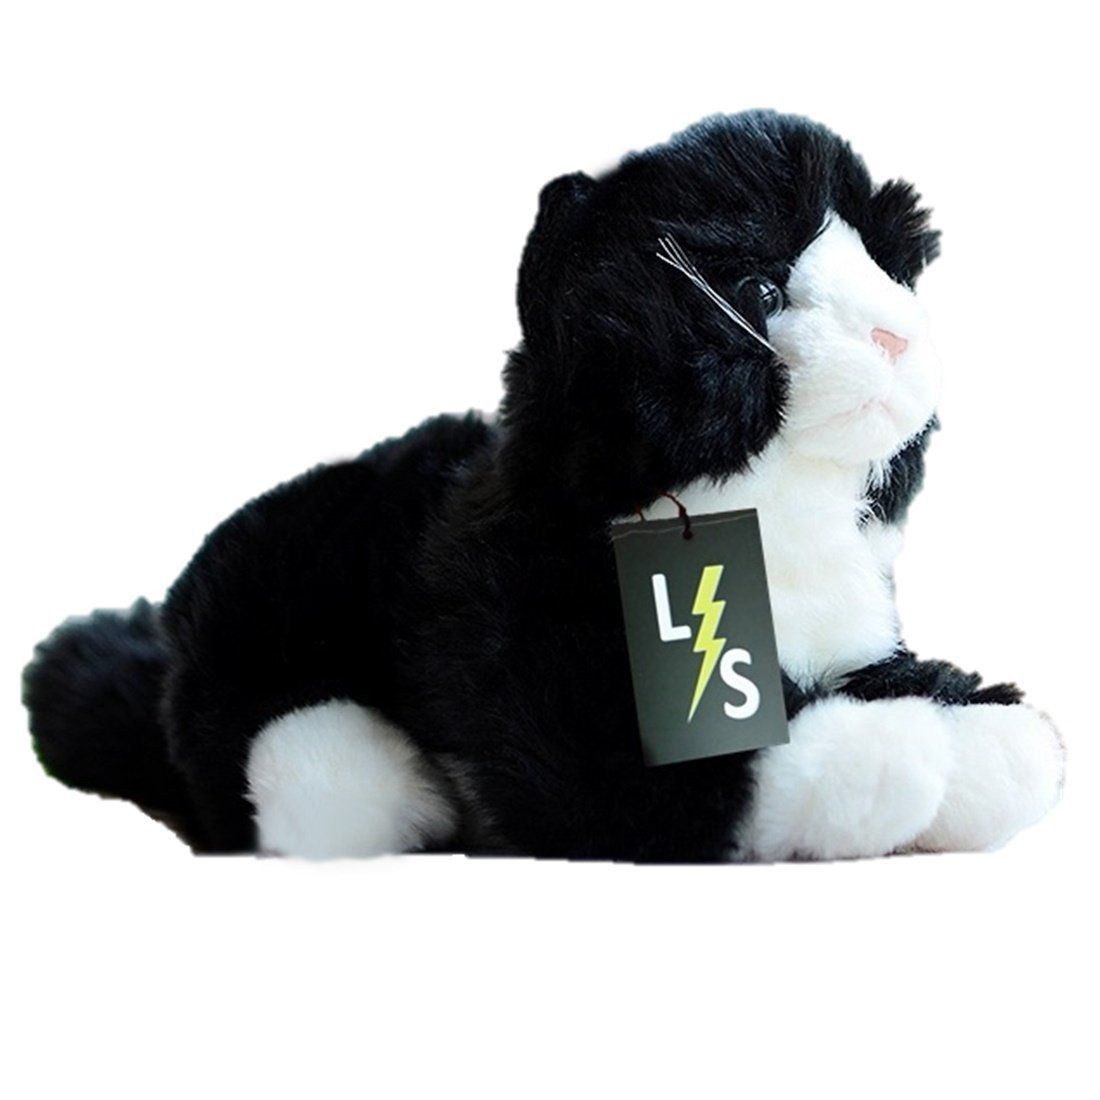 LightningStore Adorable Cute Black and White Border Collie Puppy Dog D